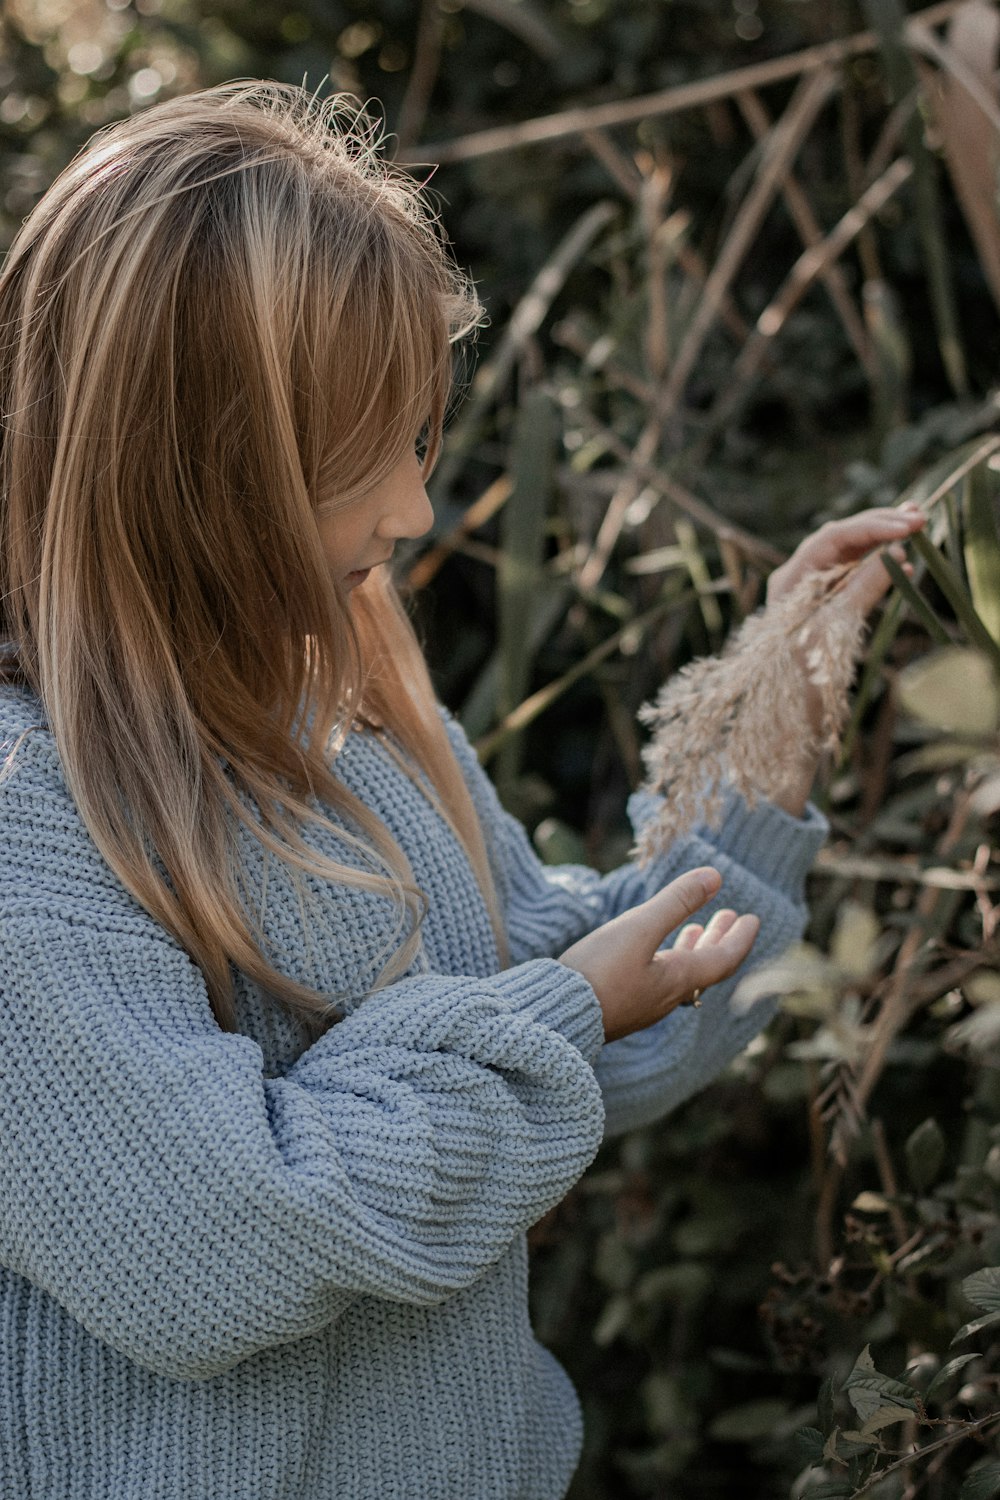 a woman in a blue sweater is holding a plant